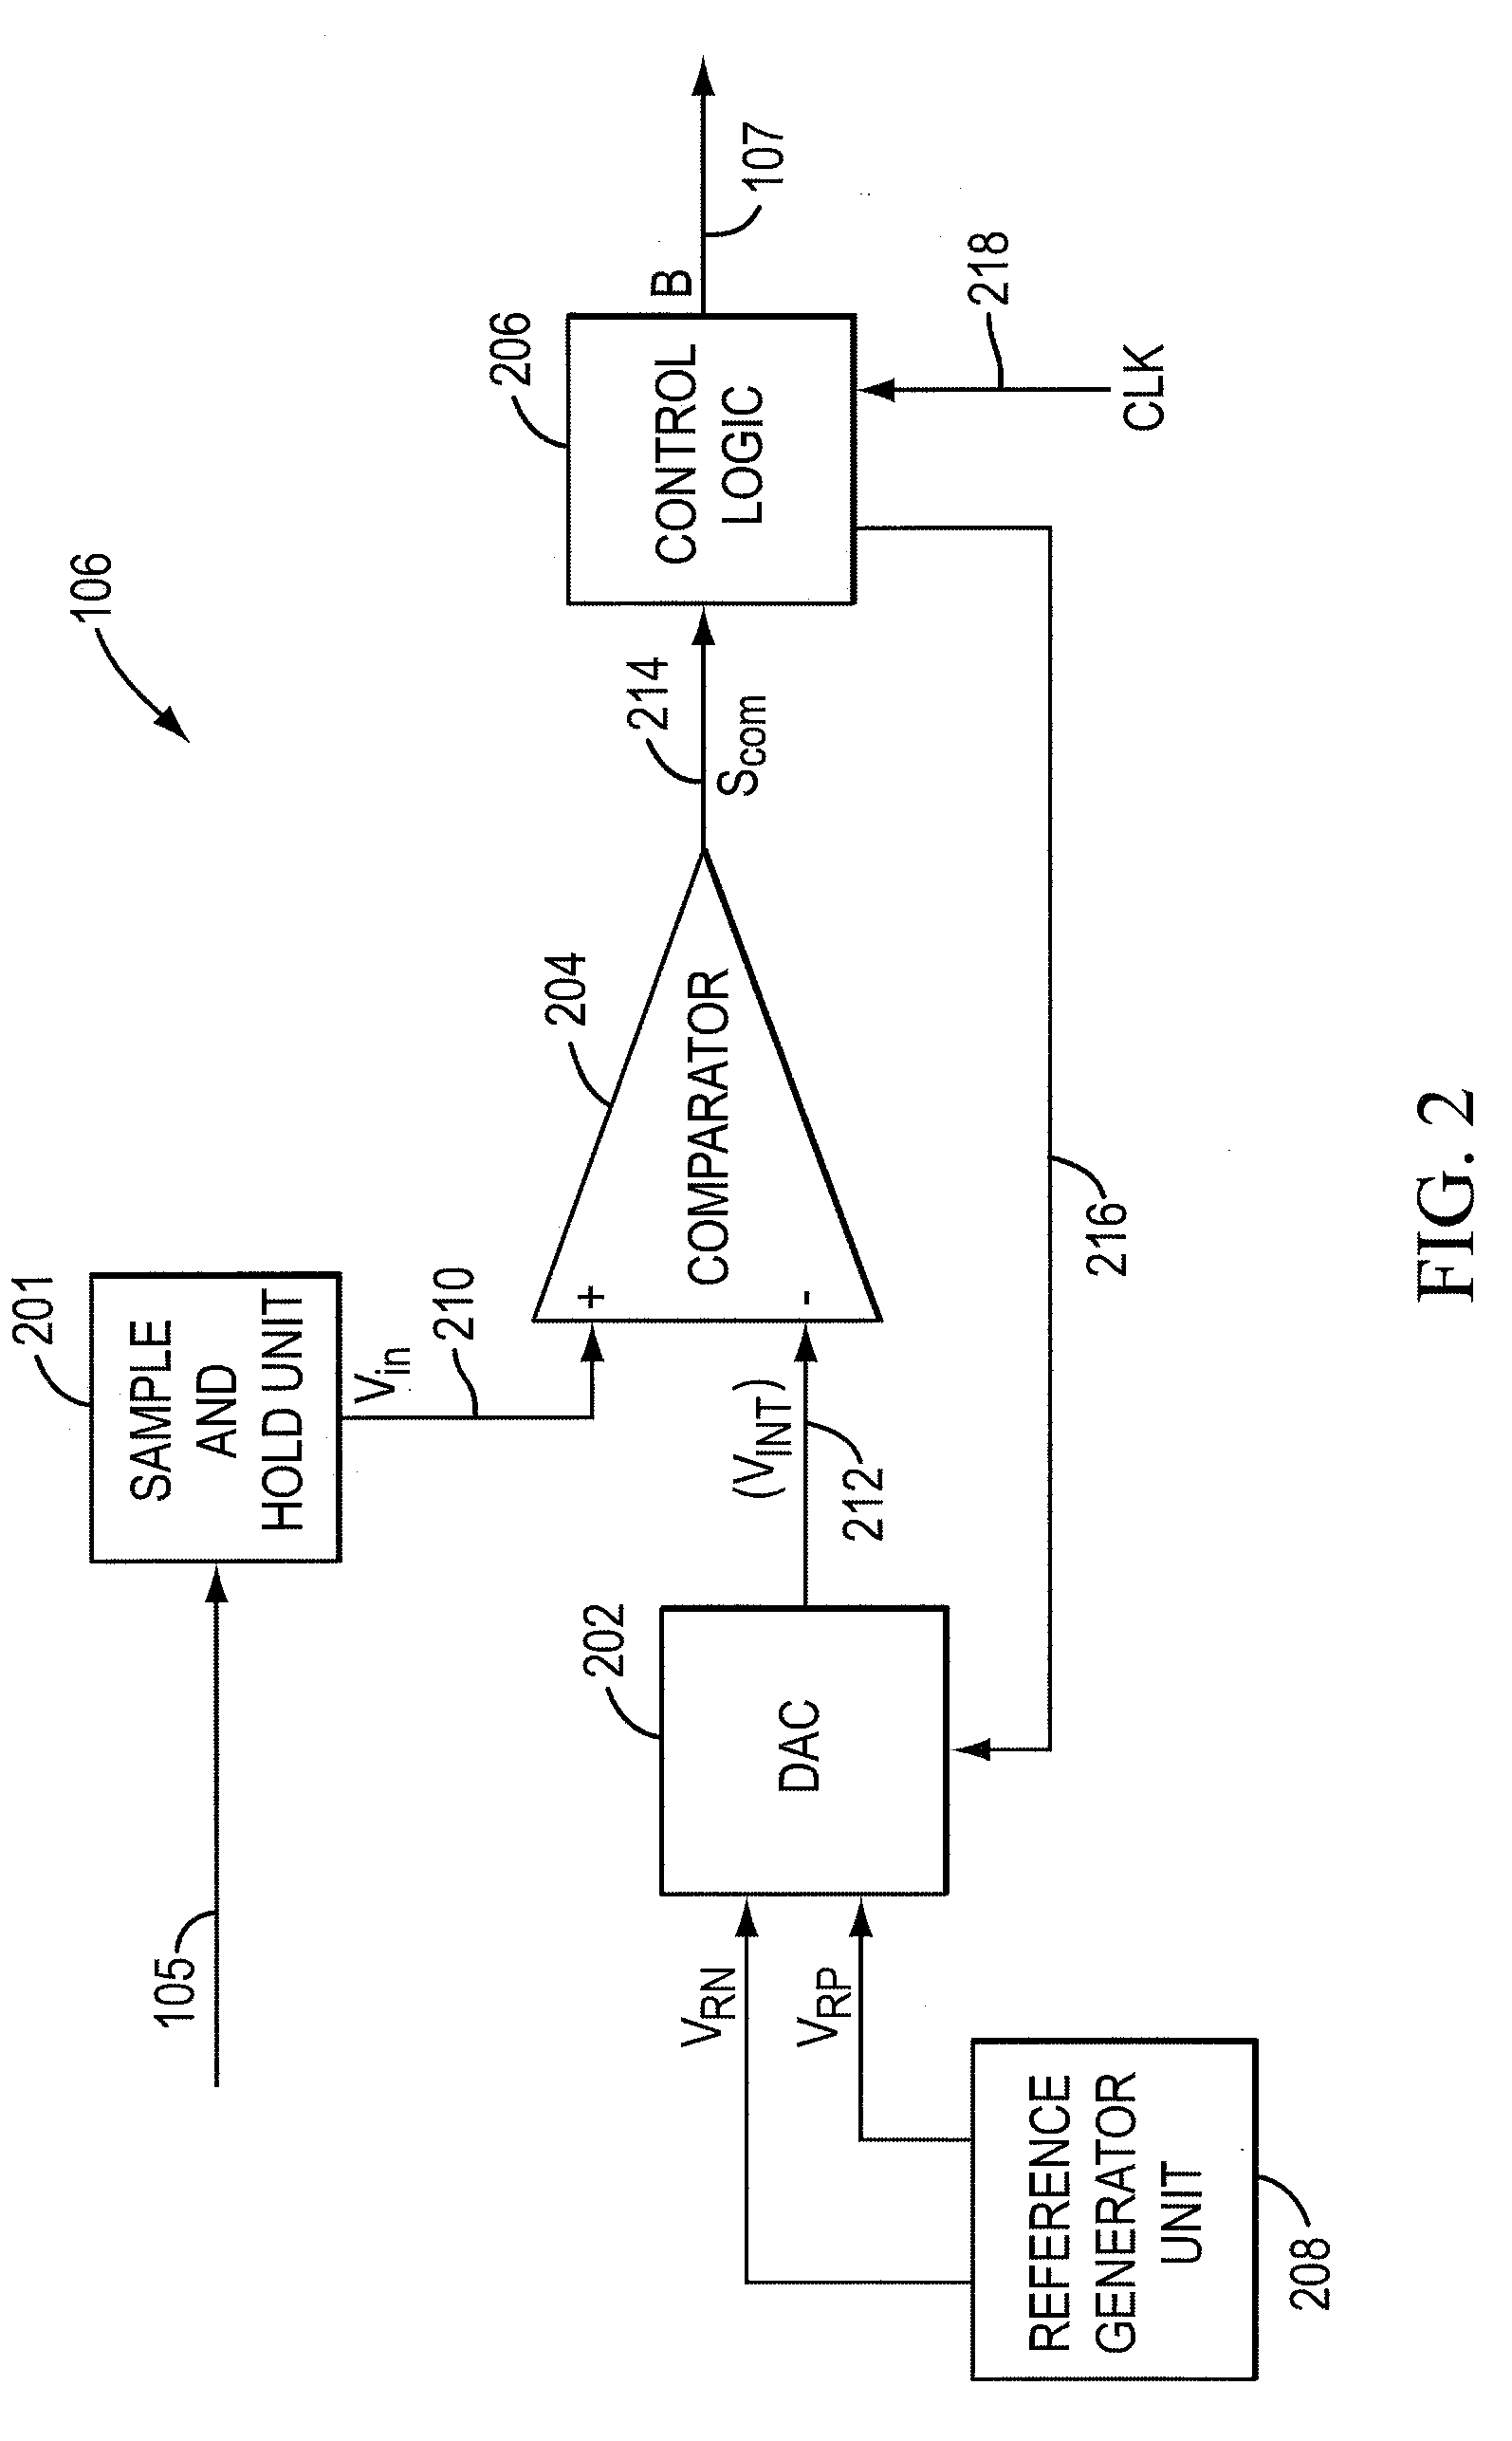 Method and apparatus to improve reference voltage accuracy